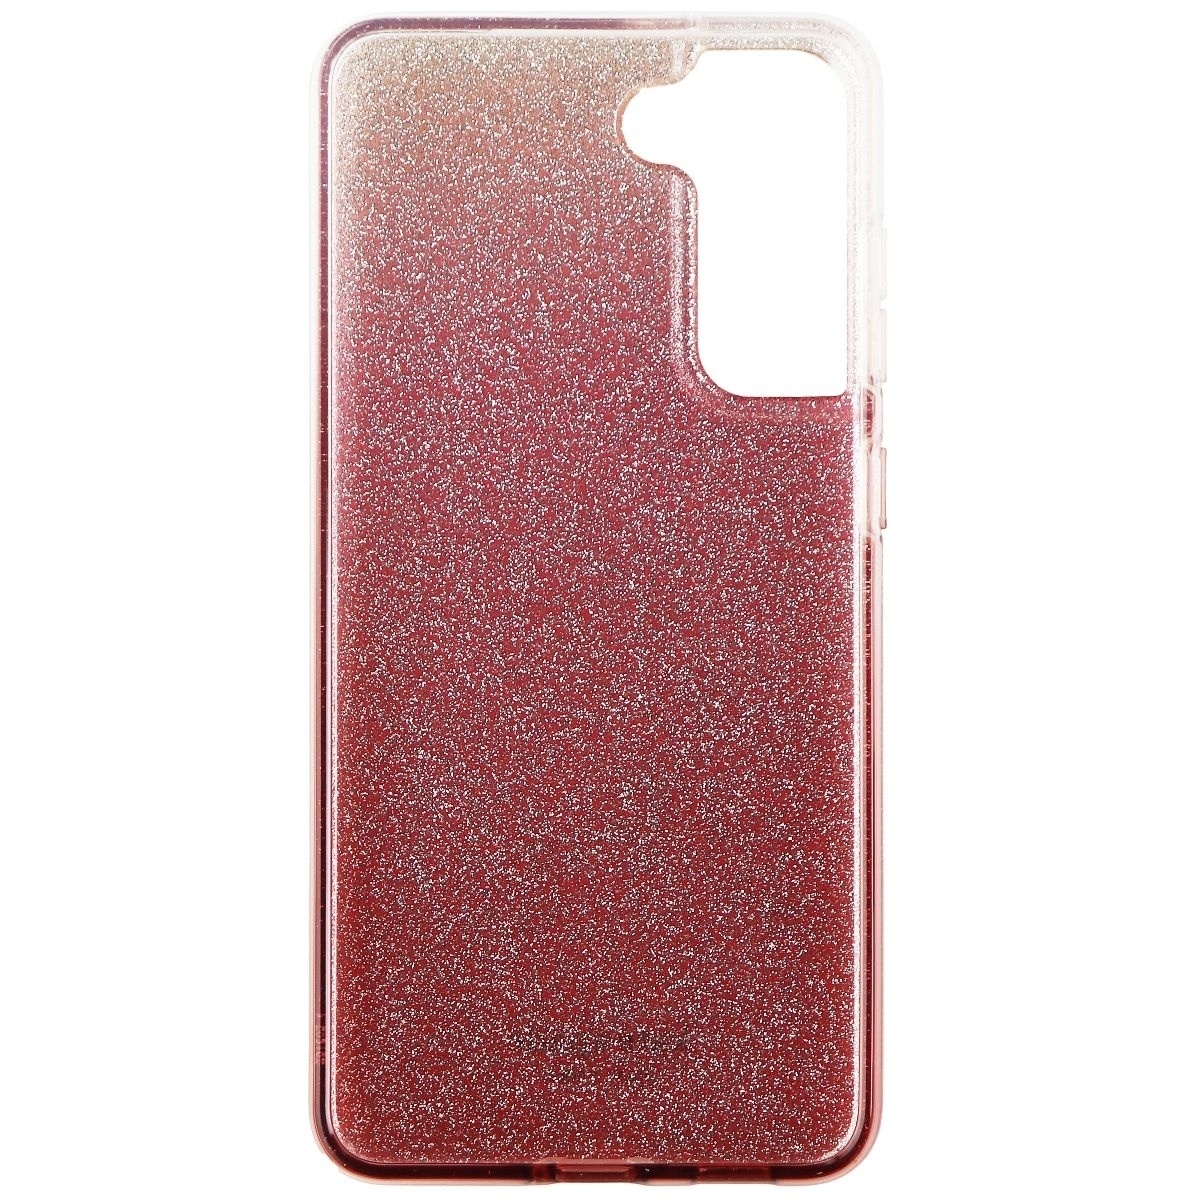 Kate Spade New York Series Case For Samsung Galaxy S21 FE 5G - Glitter/Red